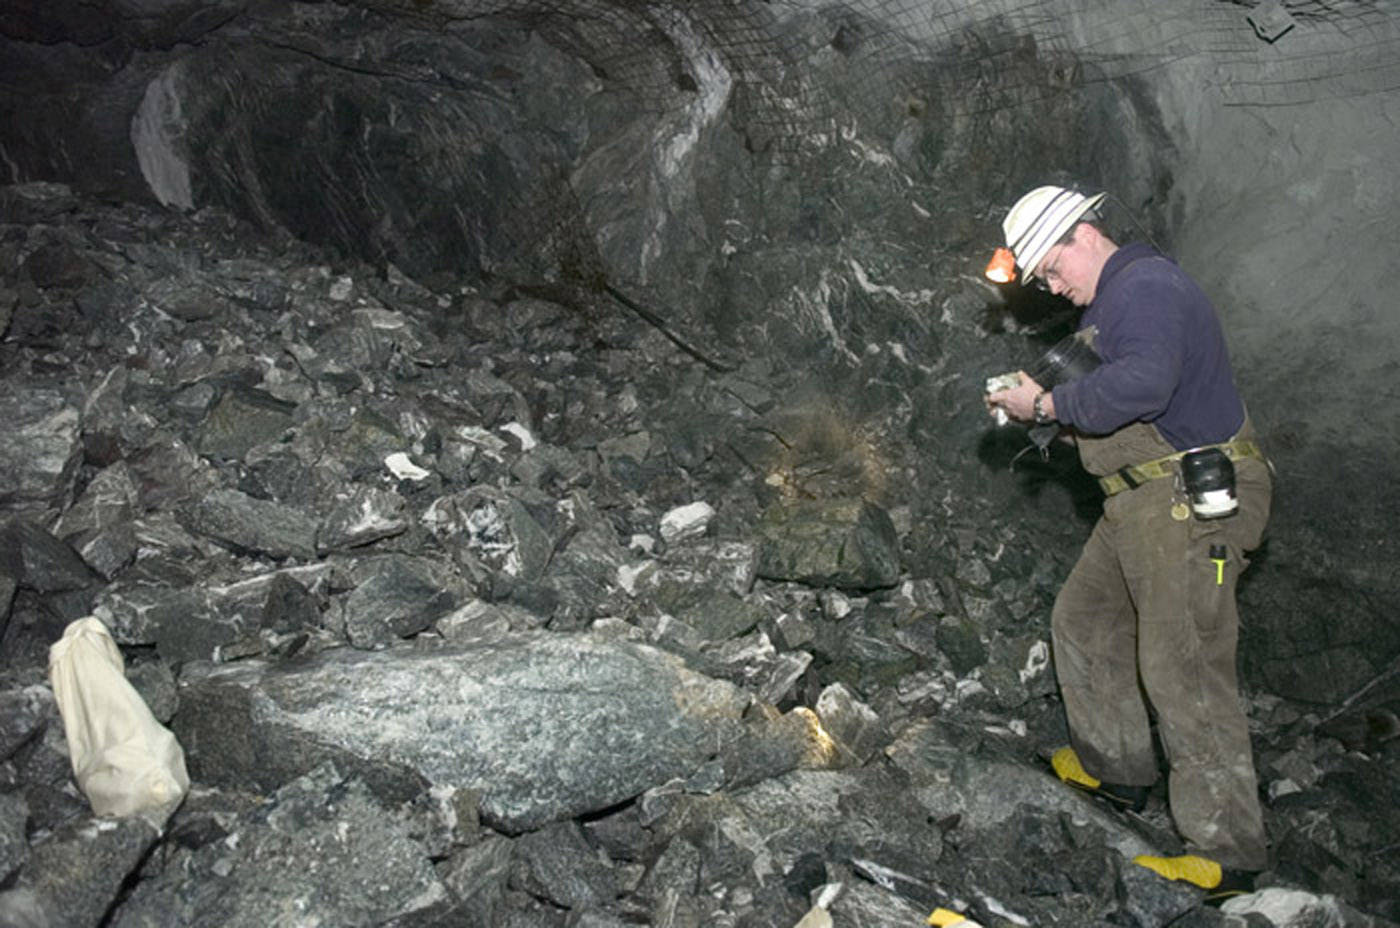 In this file photo from Feb. 2007, Kevin Torpy, Chief Engineer for Coeur Alaska, studies rock at a freshly blasted area in the tunnel coming from the Comet Mine side of the Kensington Mine project. (Juneau Empire File)